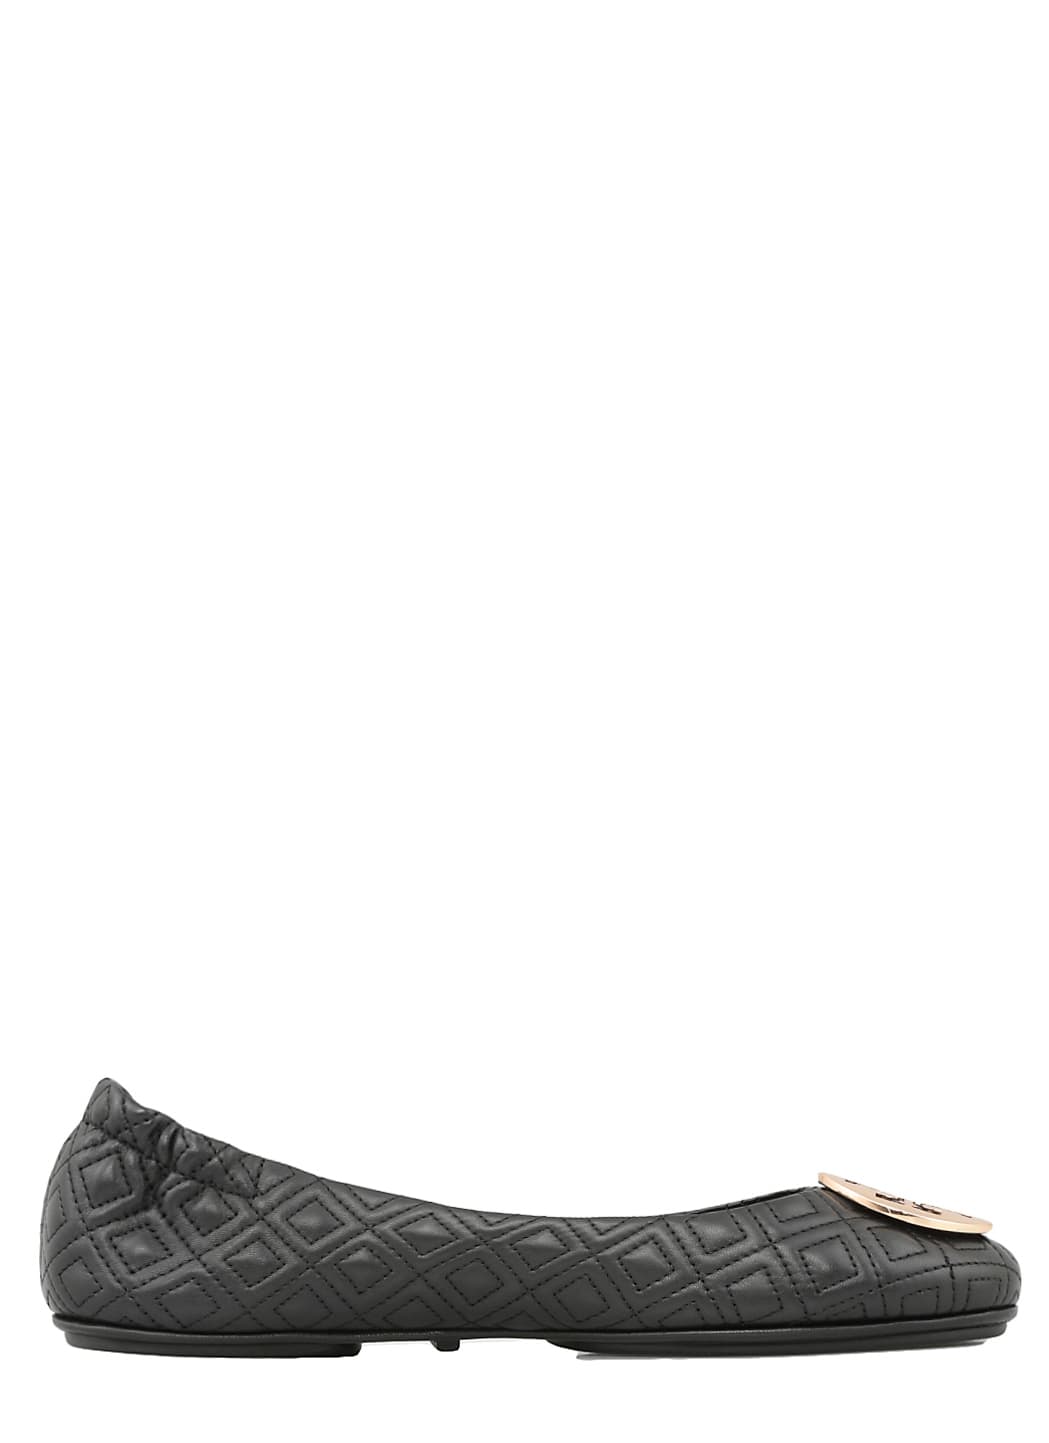 Tory Burch Quilted Leather Ballet Flat